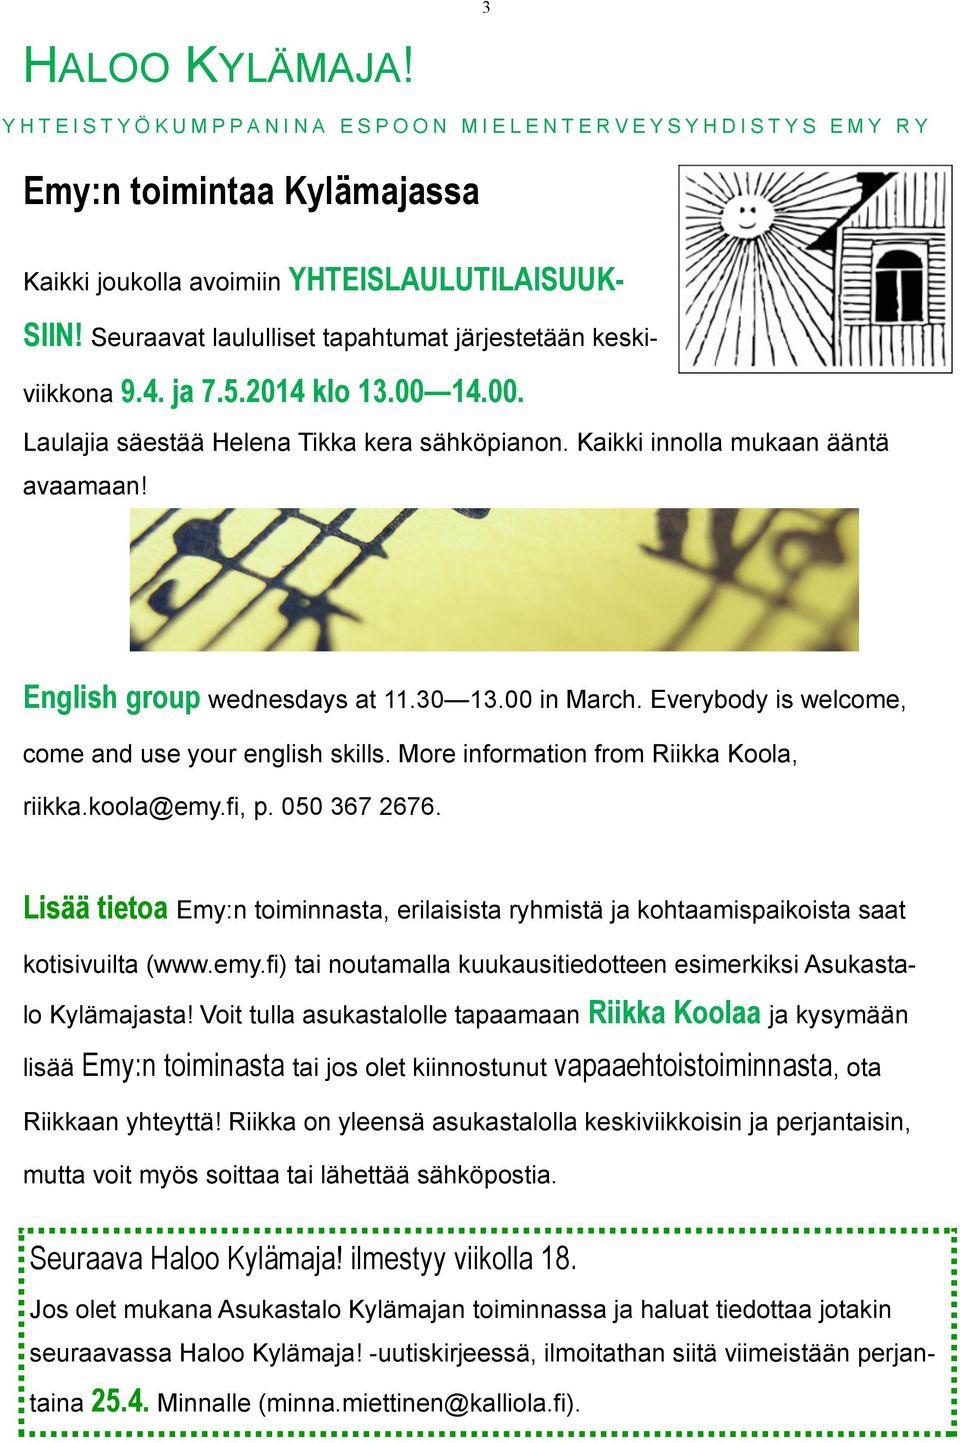 English group wednesdays at 11.30 13.00 in March. Everybody is welcome, come and use your english skills. More information from Riikka Koola, riikka.koola@emy.fi, p. 050 367 2676.